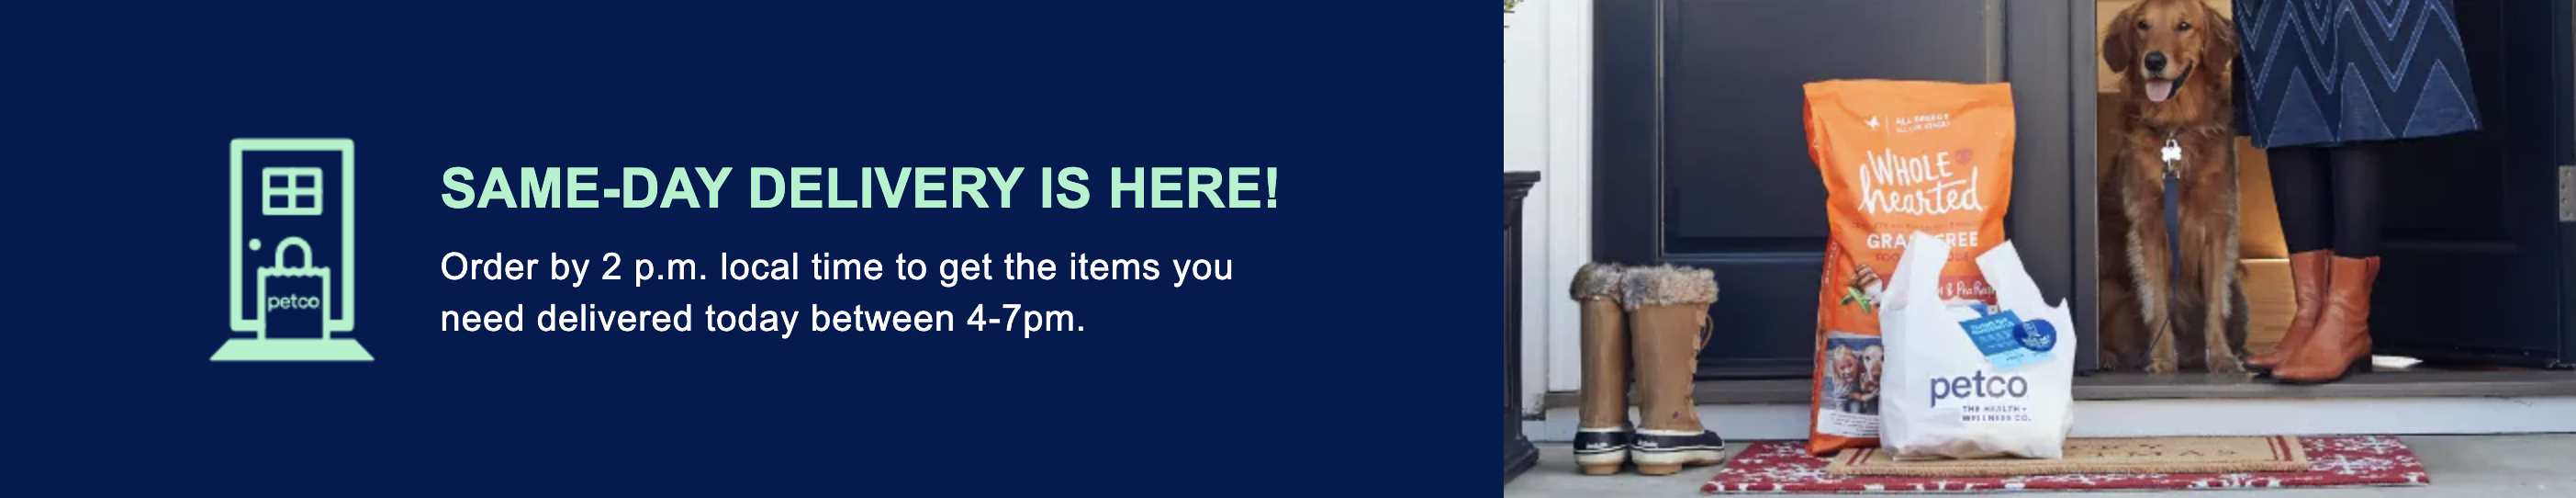 Petco: Free Same Day Delivery on Eligible Orders $35+